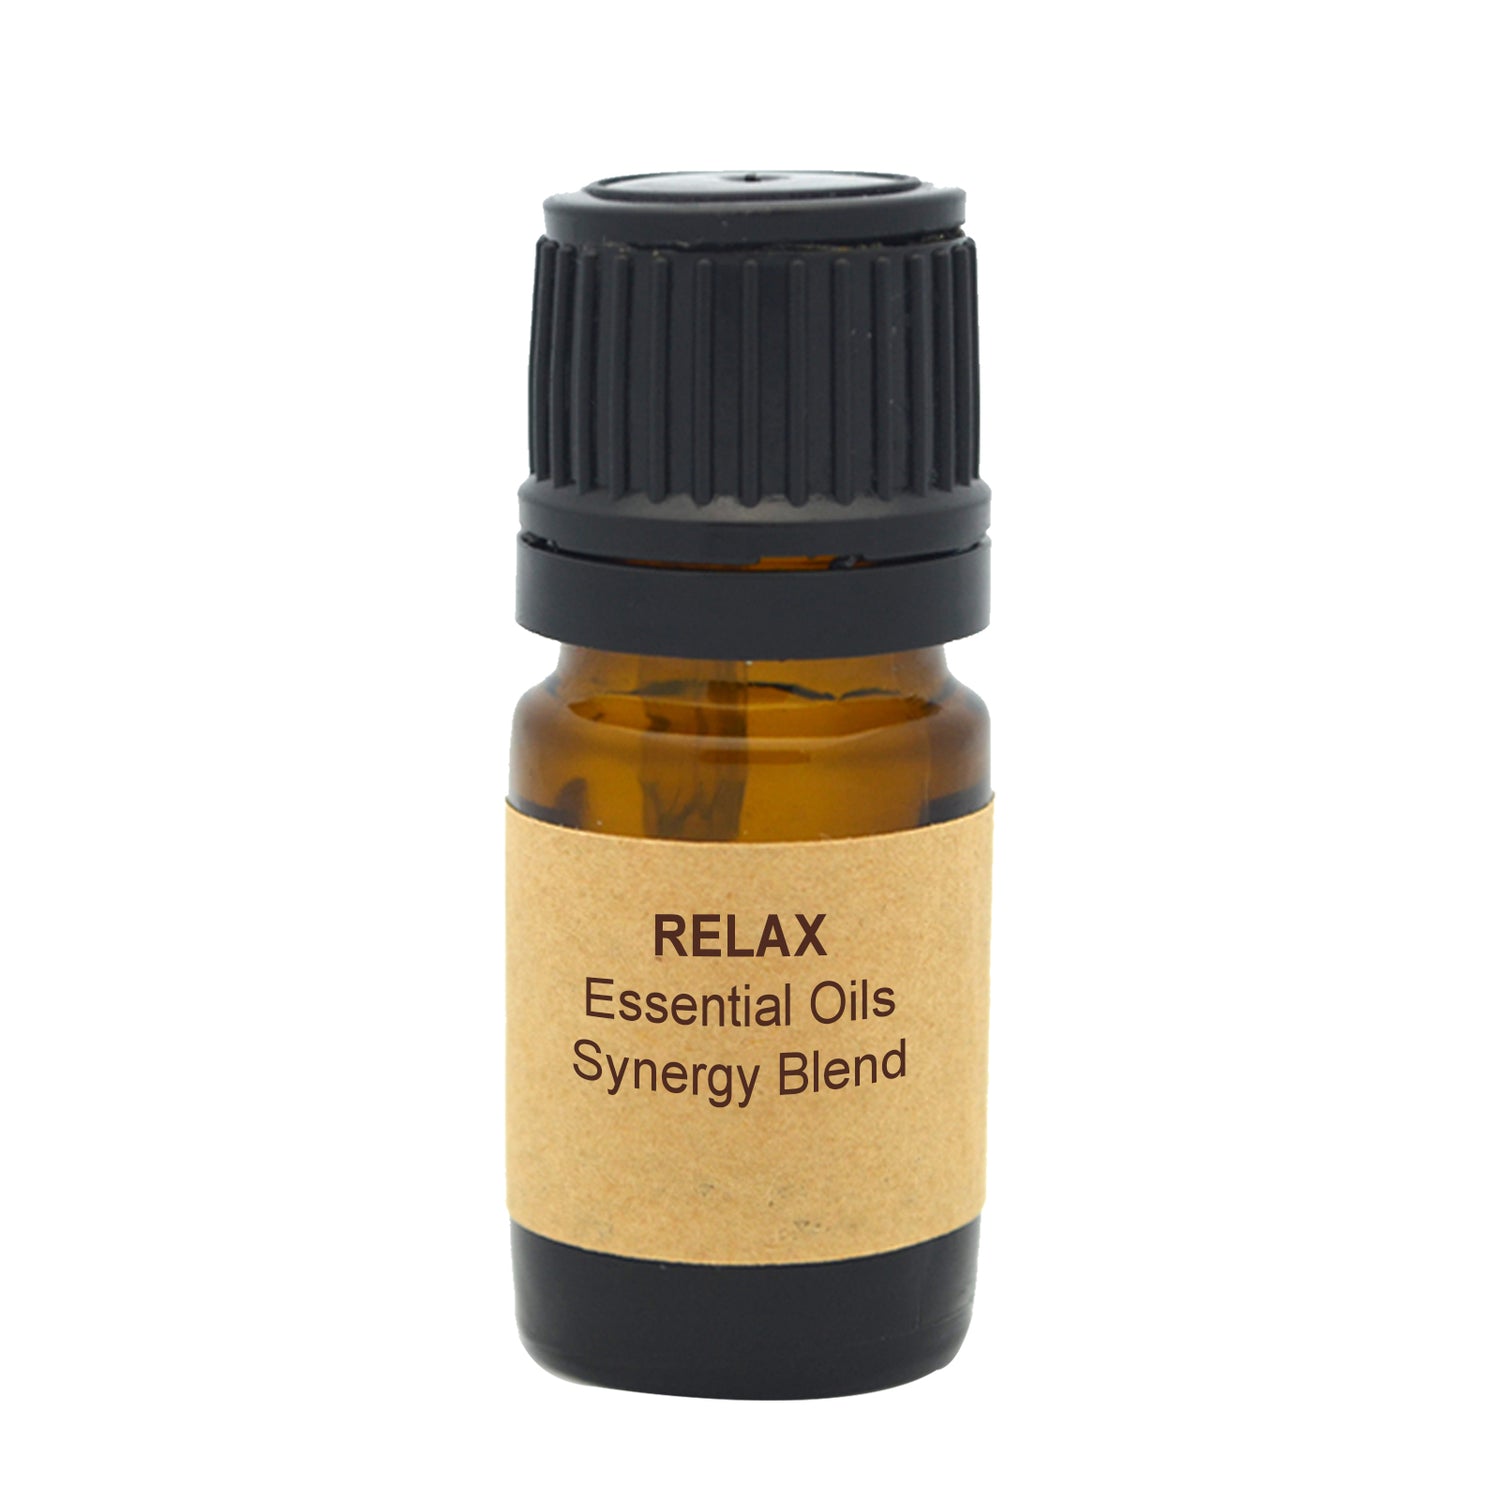 Relax Essential Oils Synergy Blend.